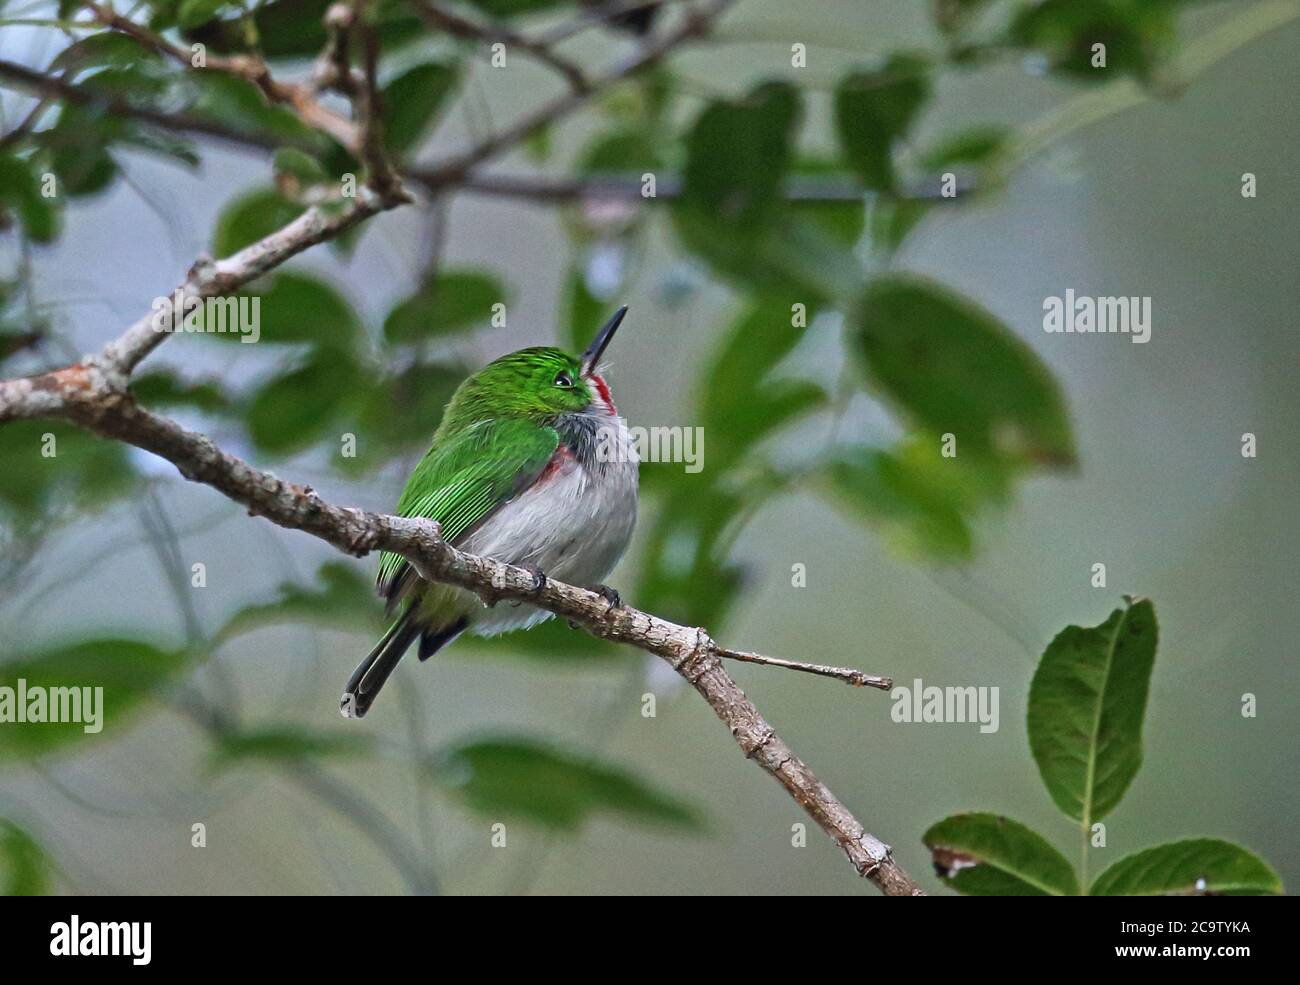 Narrow-billed Tody (Todus angustirostris) adult perched on twig  (endemic species)  Bahoruco Mountains NP, Dominican Republic                   Januar Stock Photo